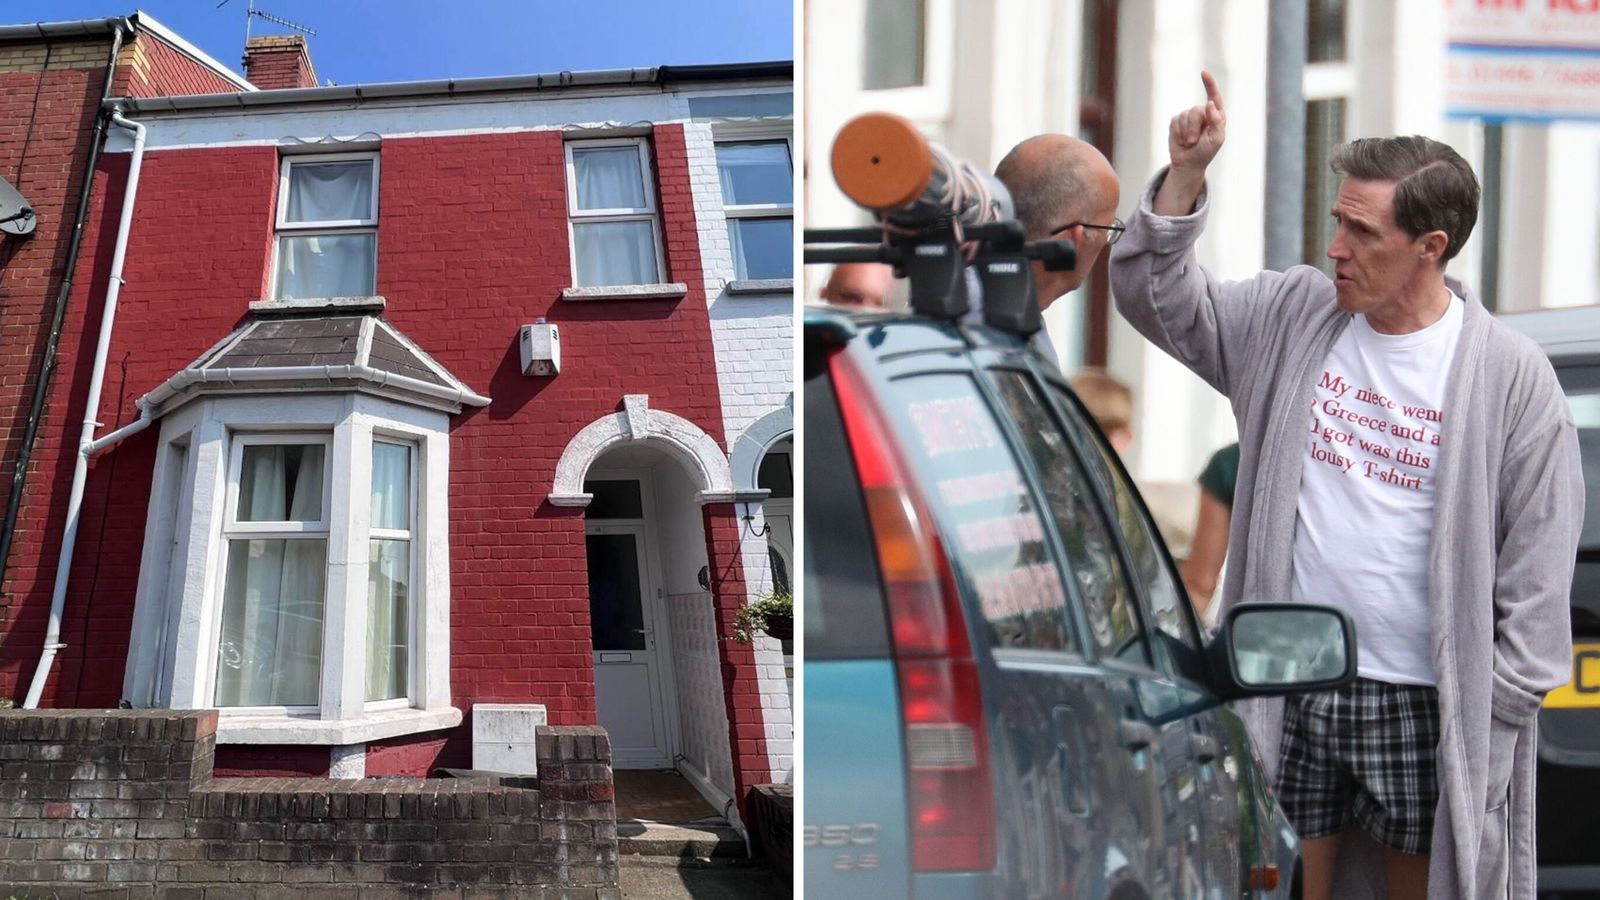 Gavin & Stacey: Uncle Bryn's house put up for rent in town made famous by series